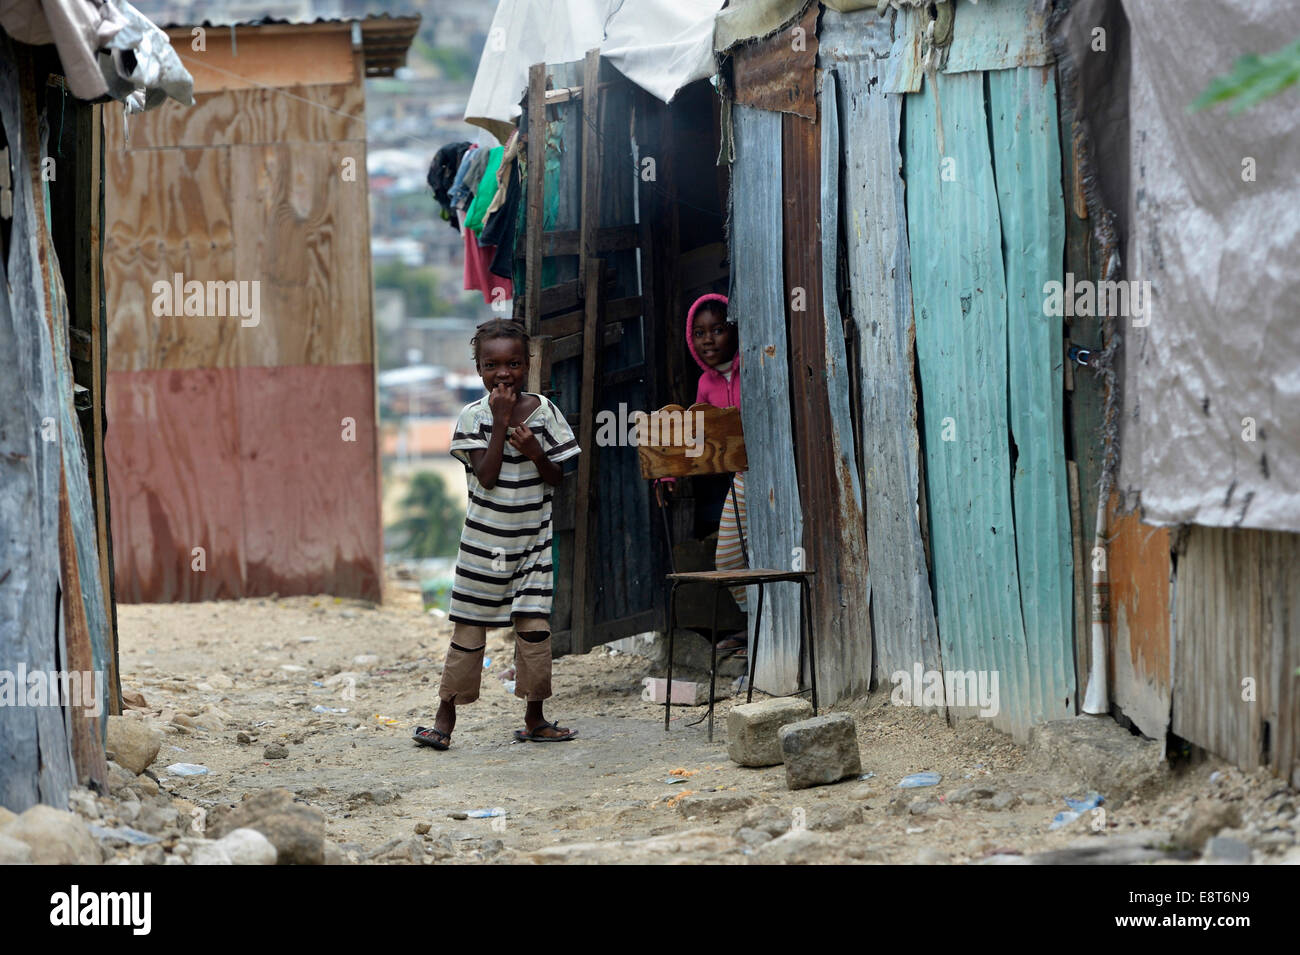 Children in front of a shack, Fort National slum, Port-au-Prince, Haiti Stock Photo